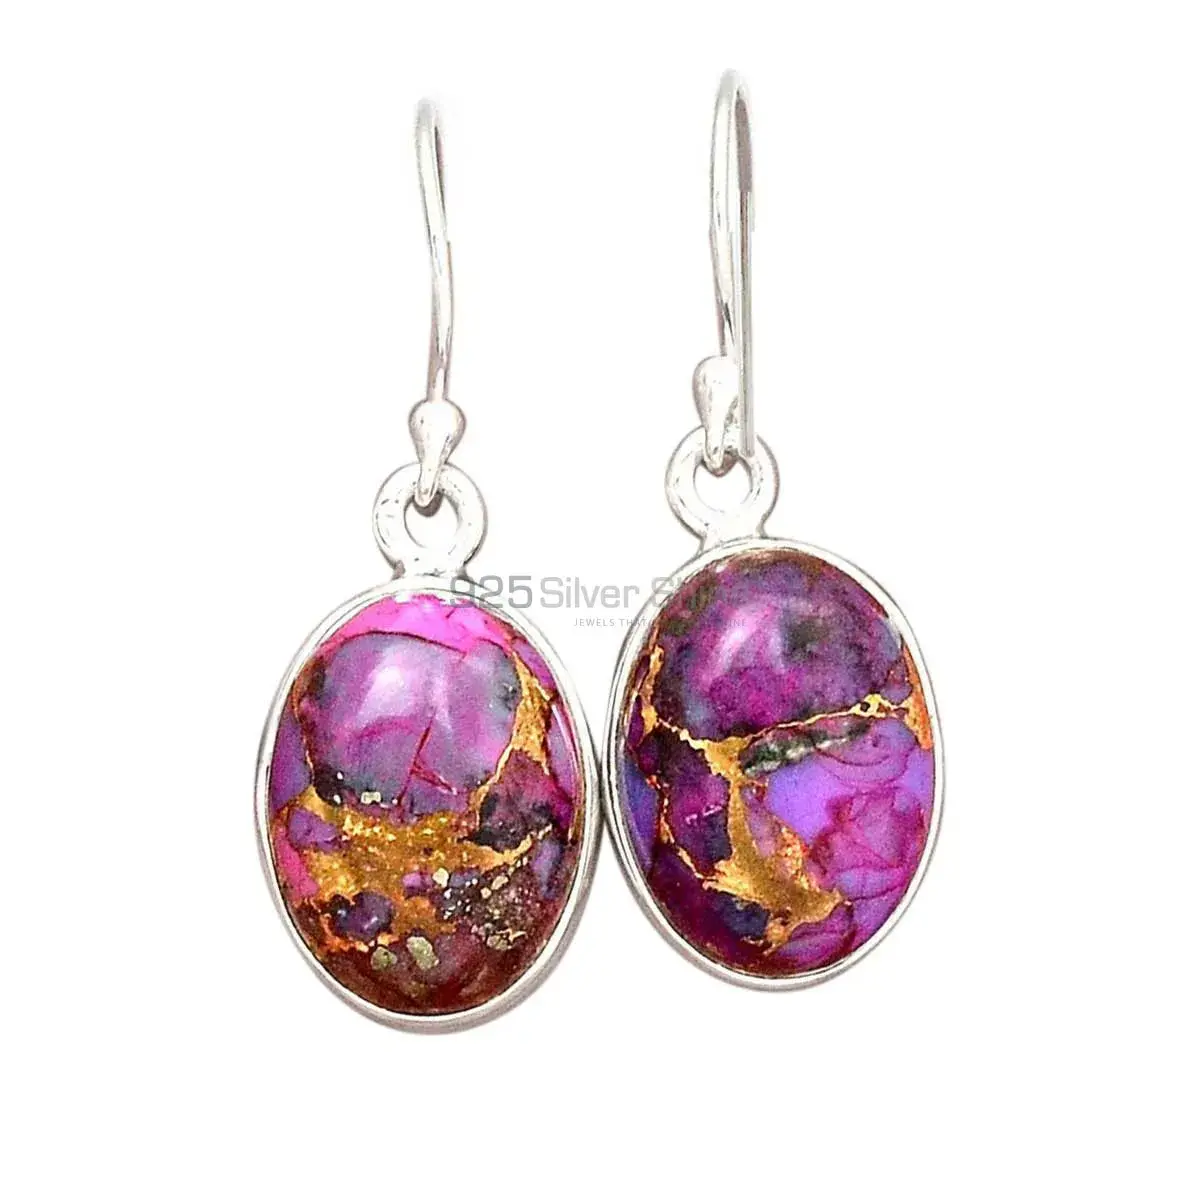 Wholesale 925 Sterling Silver Earrings In Natural Mohave Purple Turquoise Gemstone 925SE2348